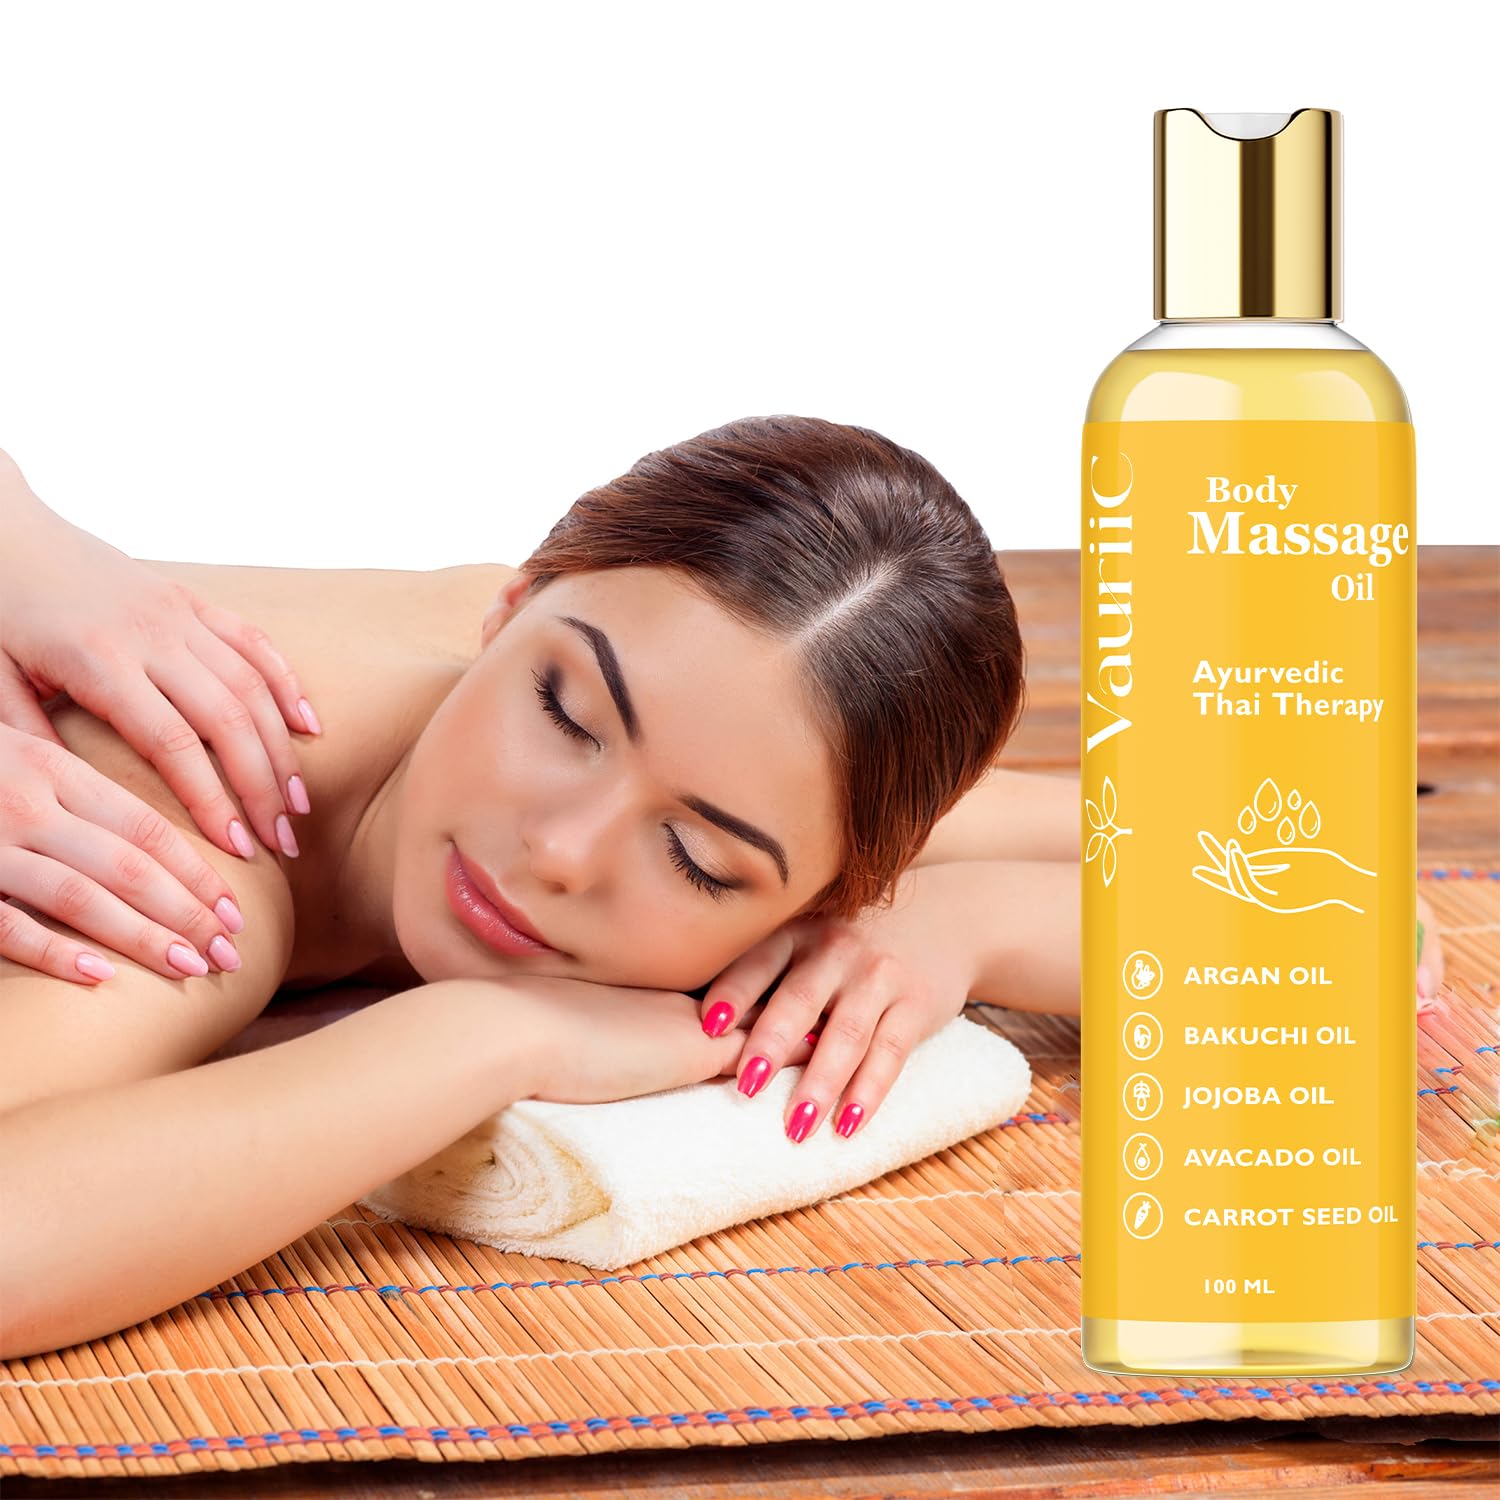 Body Massage Oil for Ayurvedic Thai Therapy | 100 ml